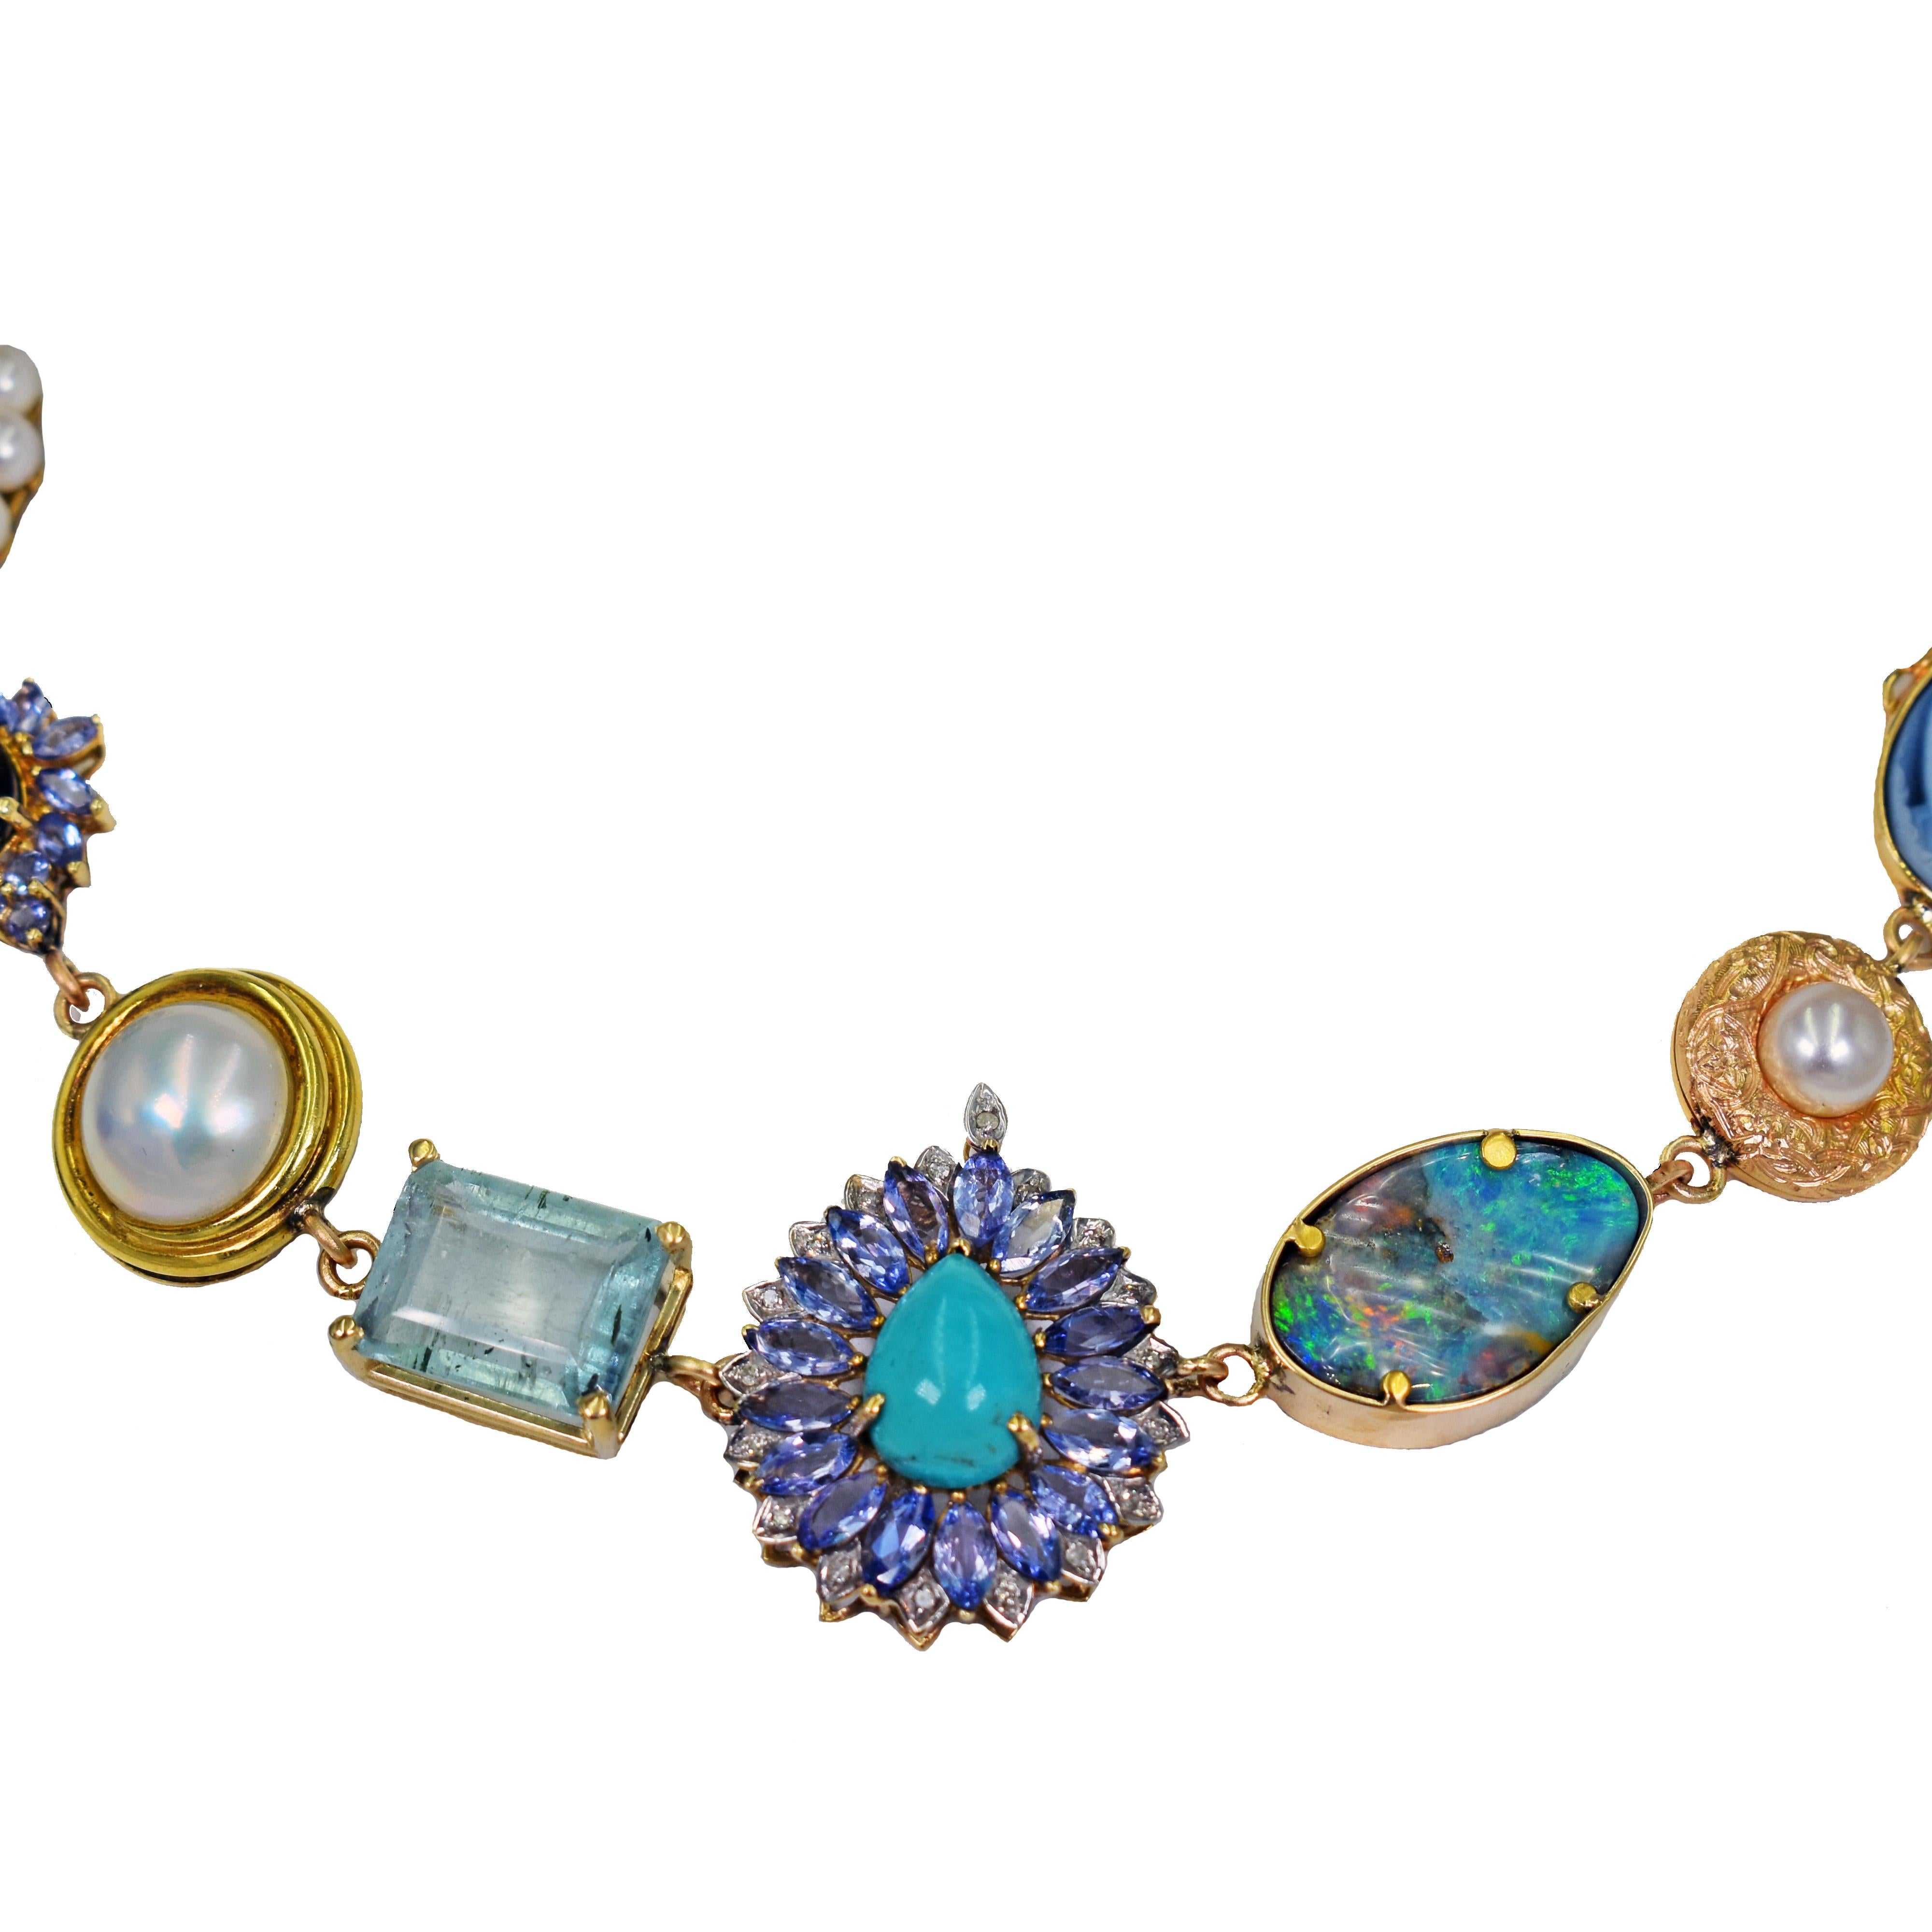 One-of-a-kind Vicki Orr 14k yellow gold Bohemian necklace with a variety of gemstones, vintage and antique jewelry components and an antique coin. Necklace has 21 unique pieces, featuring Tanzanite, Australian Boulder Opal, Amethyst, Carico Lake